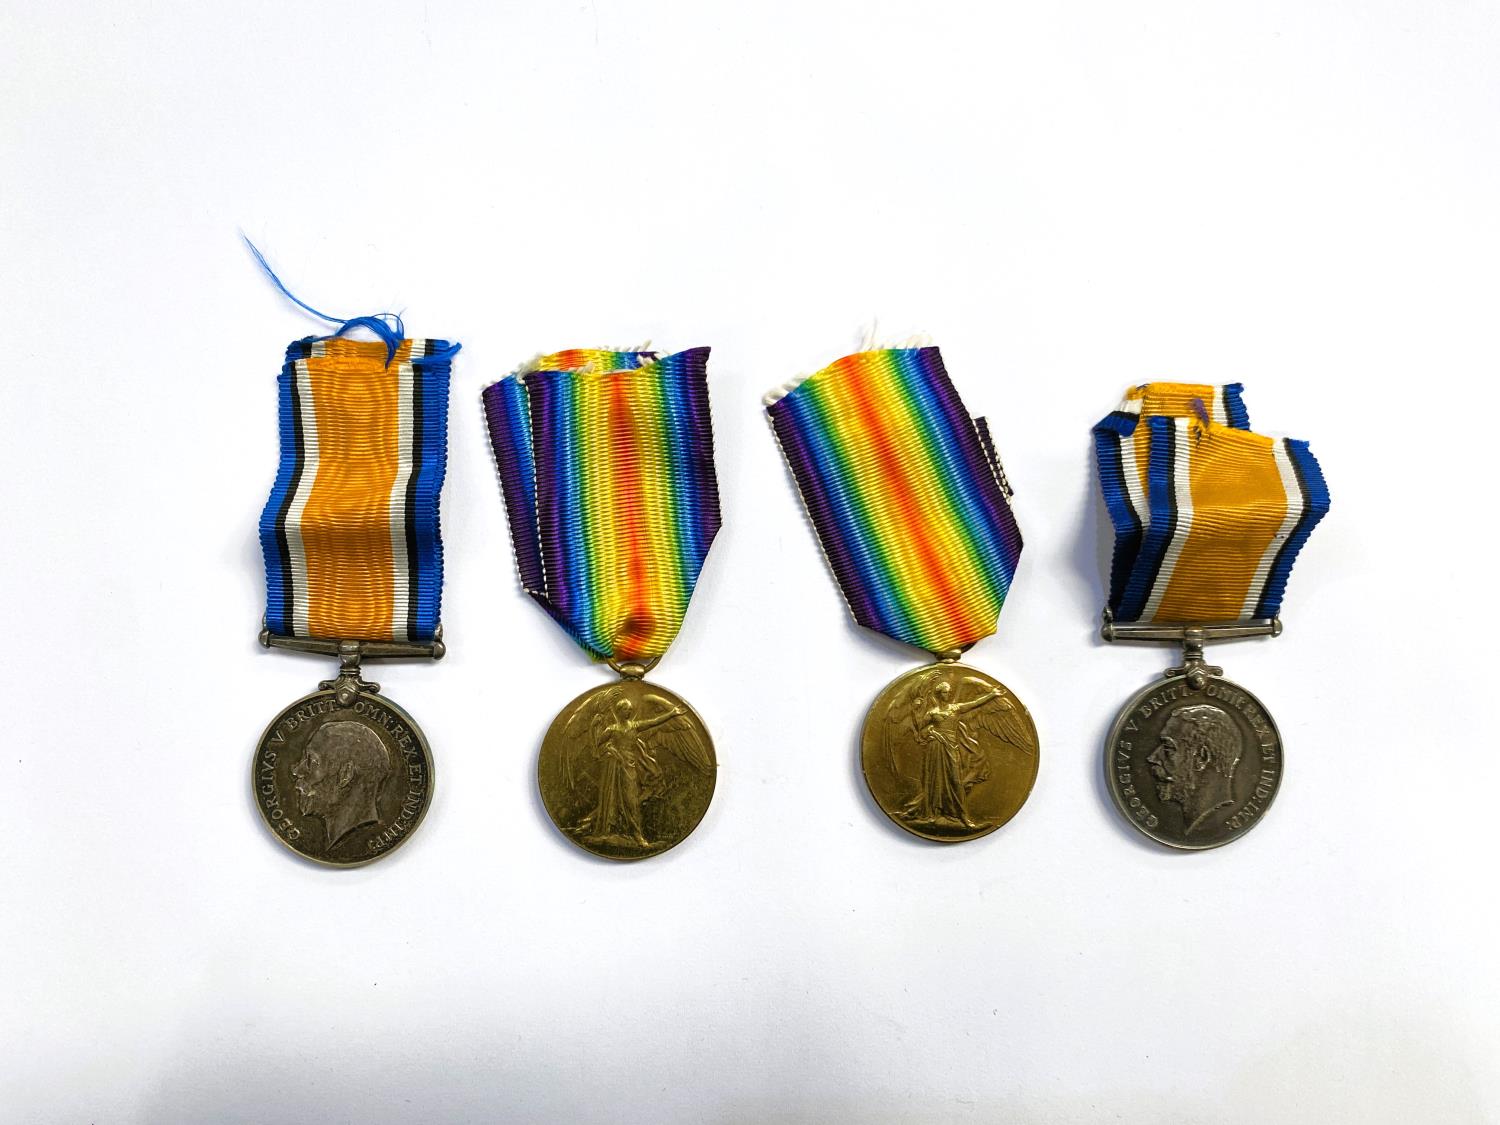 RAF: a WWI pair of medals to 109408 Pte 1 E.O. BYLES and another pair to 14133 Cpl J. GRAHAM